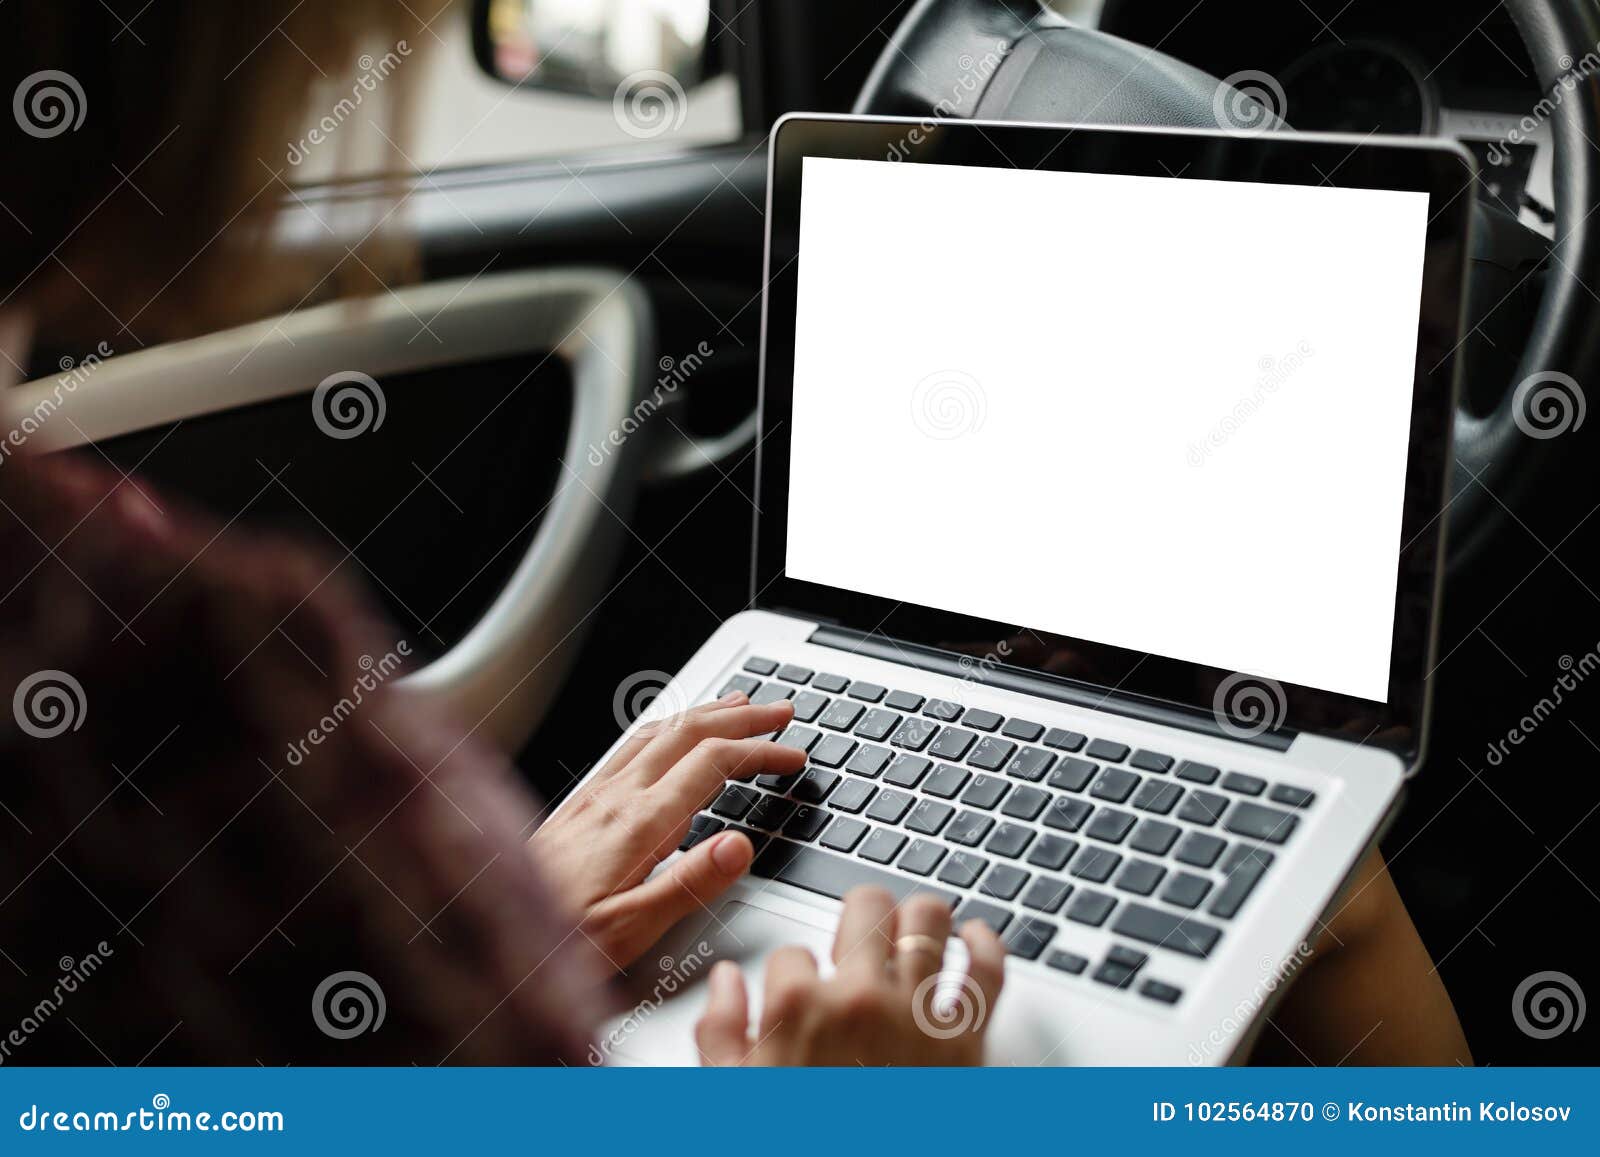 Anonymous woman browsing laptop in car. Crop mockup image of casual woman watching and using laptop while sitting on driver`s seat in car.